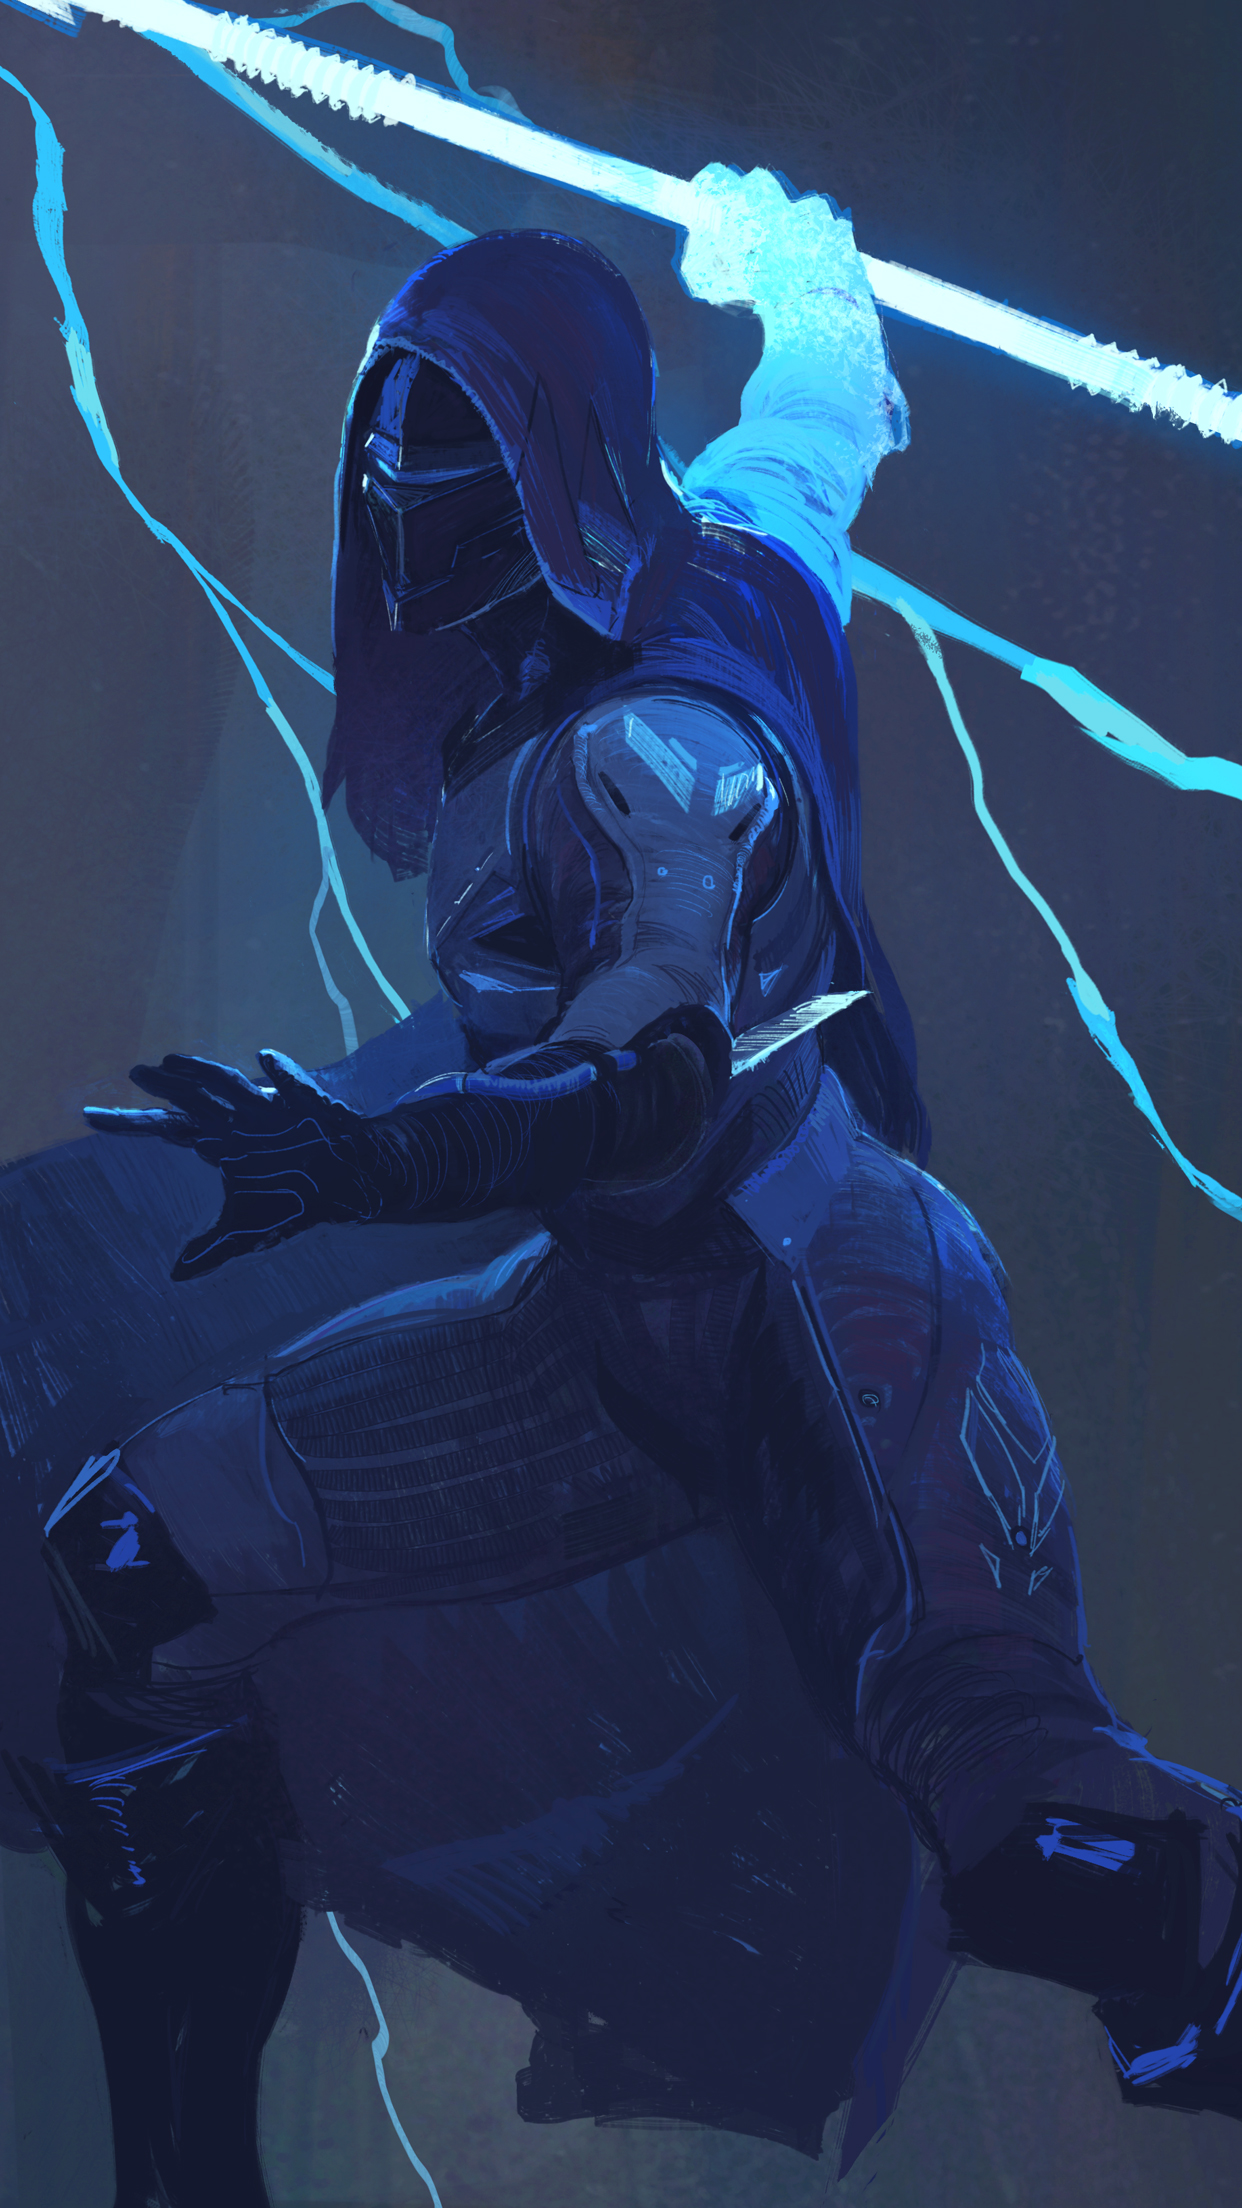 Mobile wallpaper featuring a stylized illustration of a Destiny 2 Guardian character surrounded by ethereal blue light.